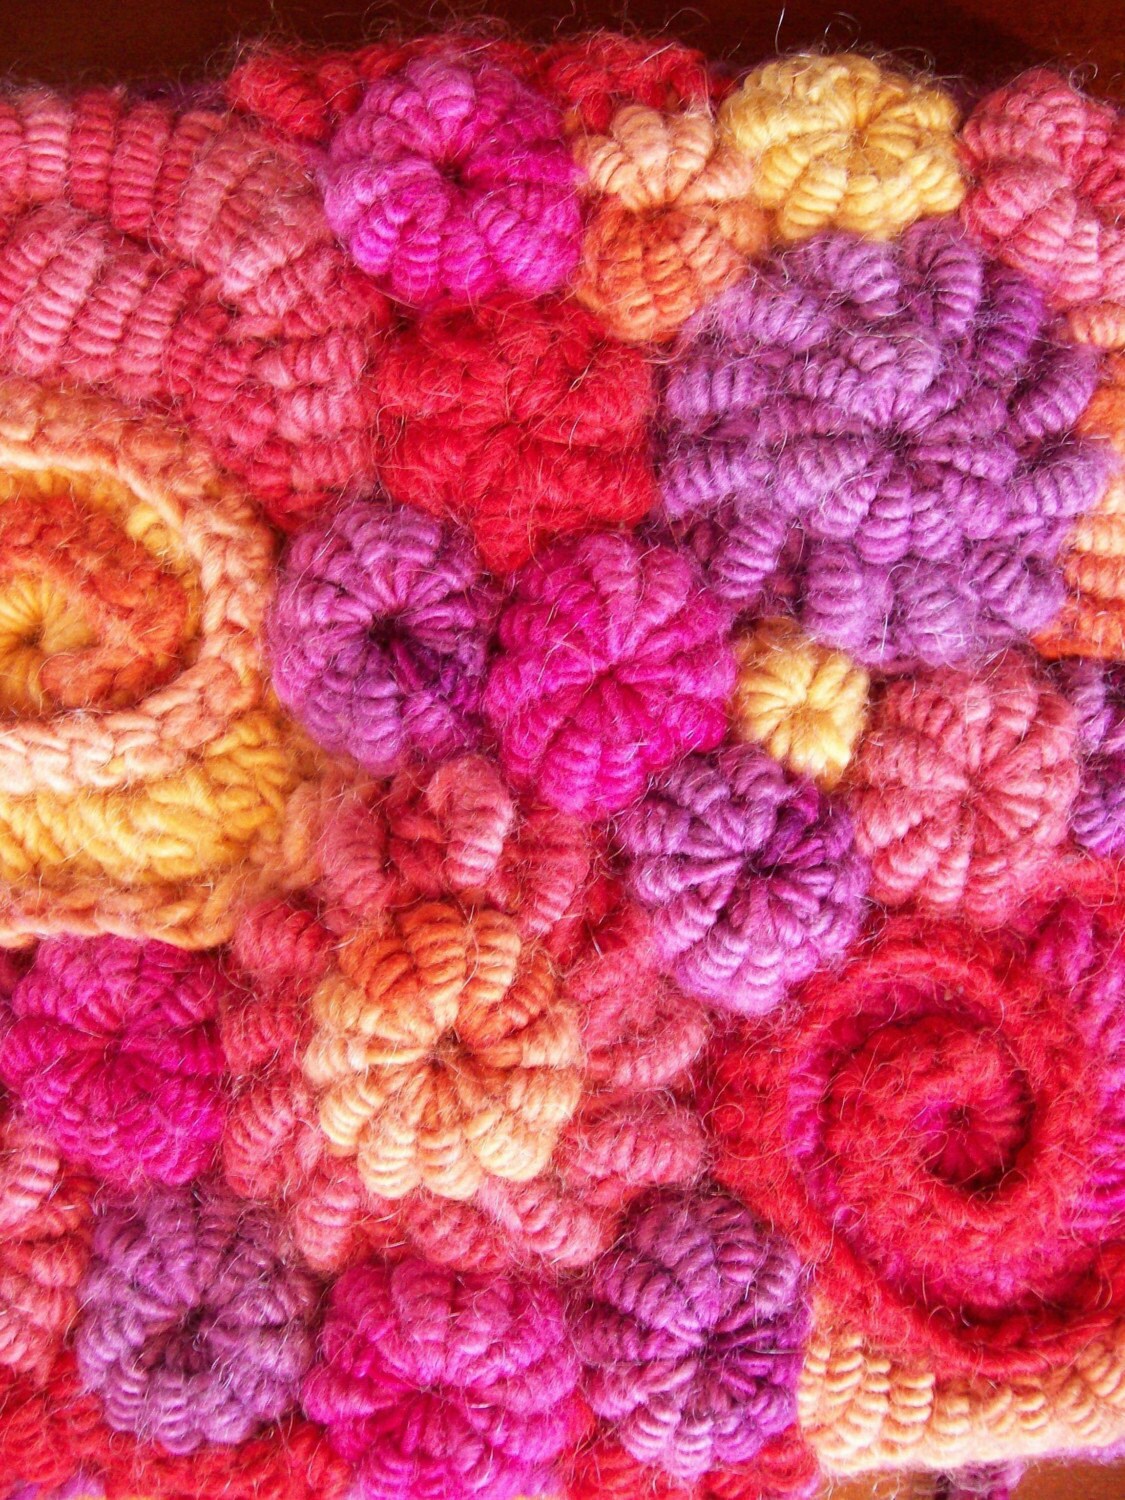 Knit and Crochet Patterns